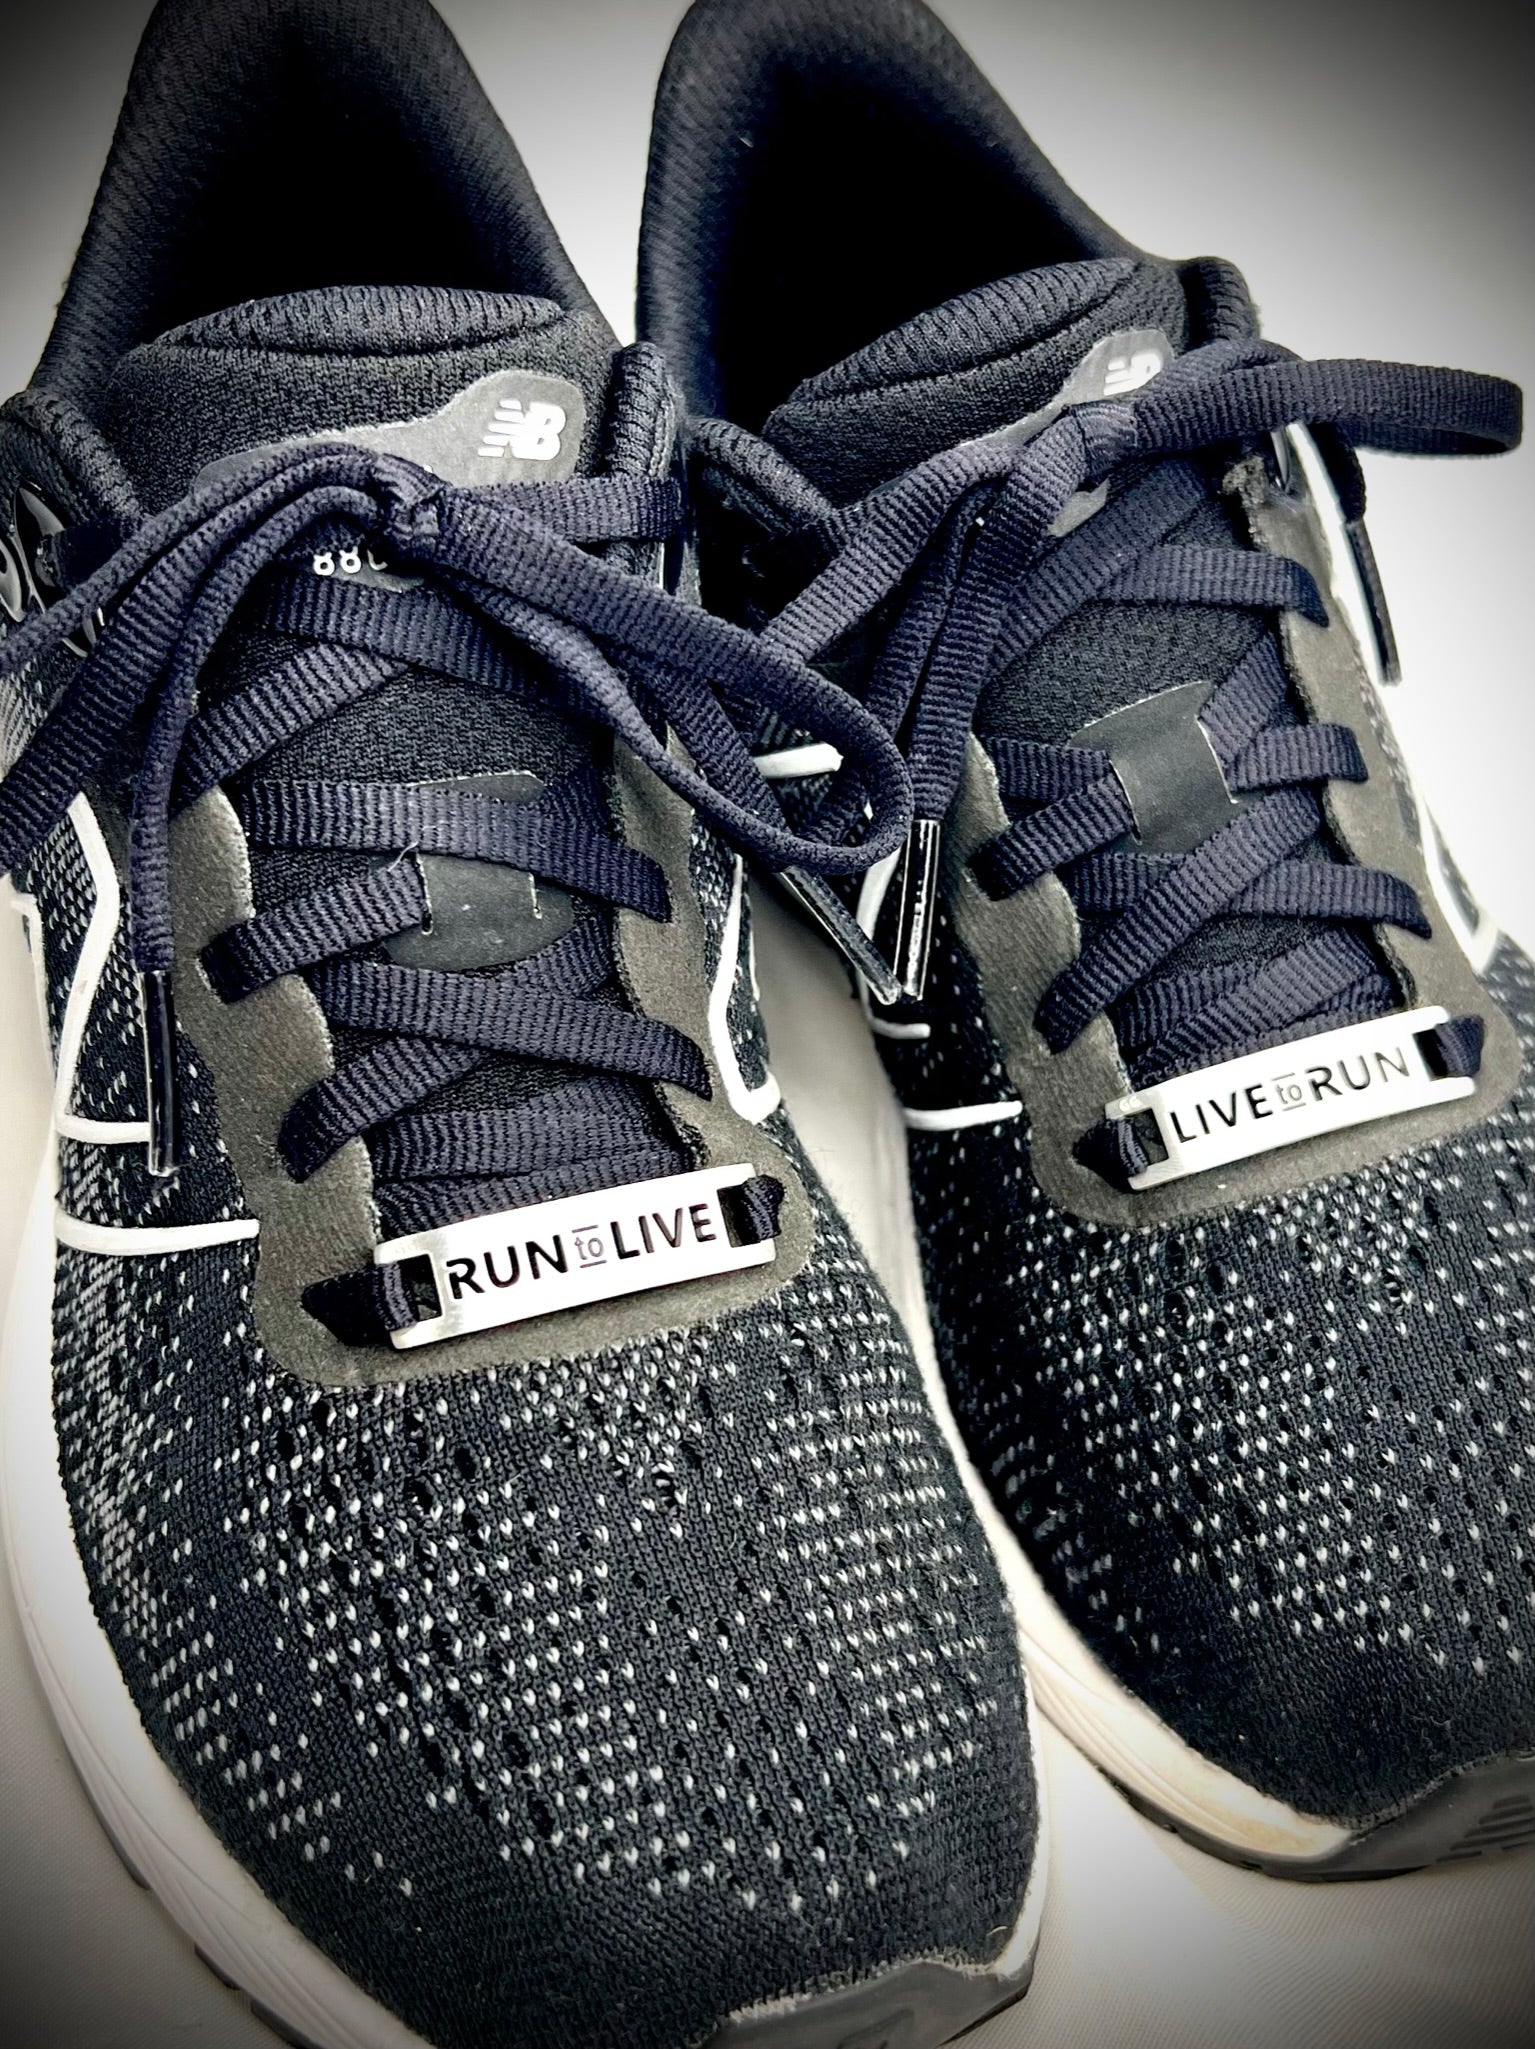 RUN TO LIVE - LIVE TO RUN. Inspirational Shoe Tags designed for athletes, marathon & trail runners, and anyone embracing an active lifestyle; promoting self-care, wellness & mindfulness. Perfect gift for all ages, our tags add motivation & style to every step. Find your reminder to stay focused & keep moving forward!